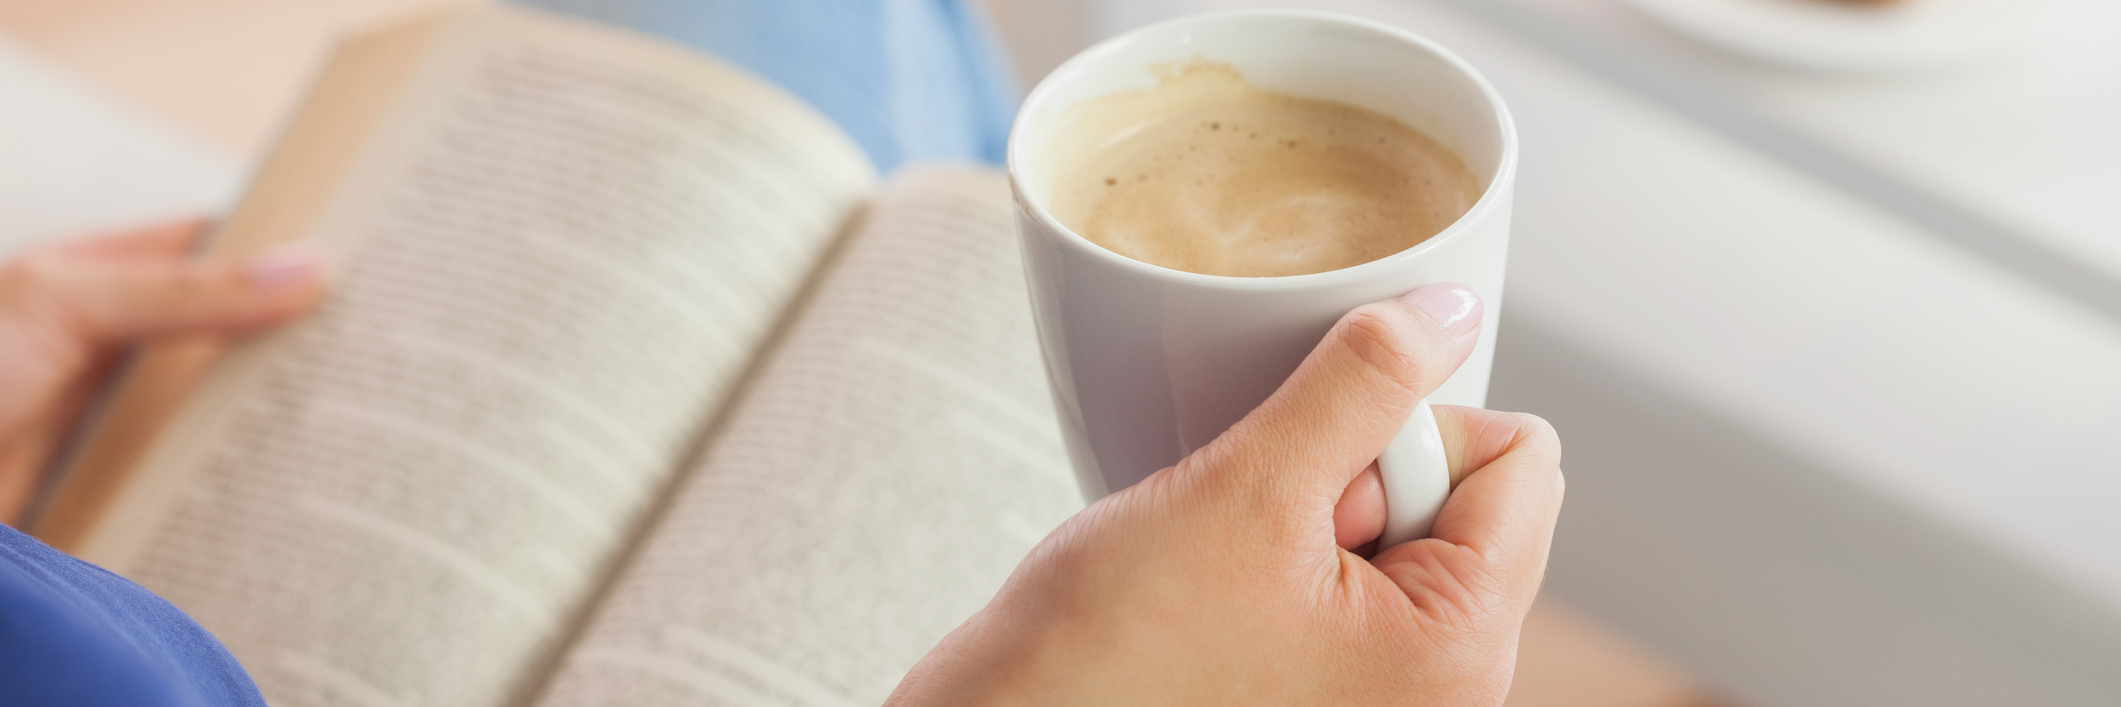 Woman sitting on the sofa reading a book holding her coffee mug